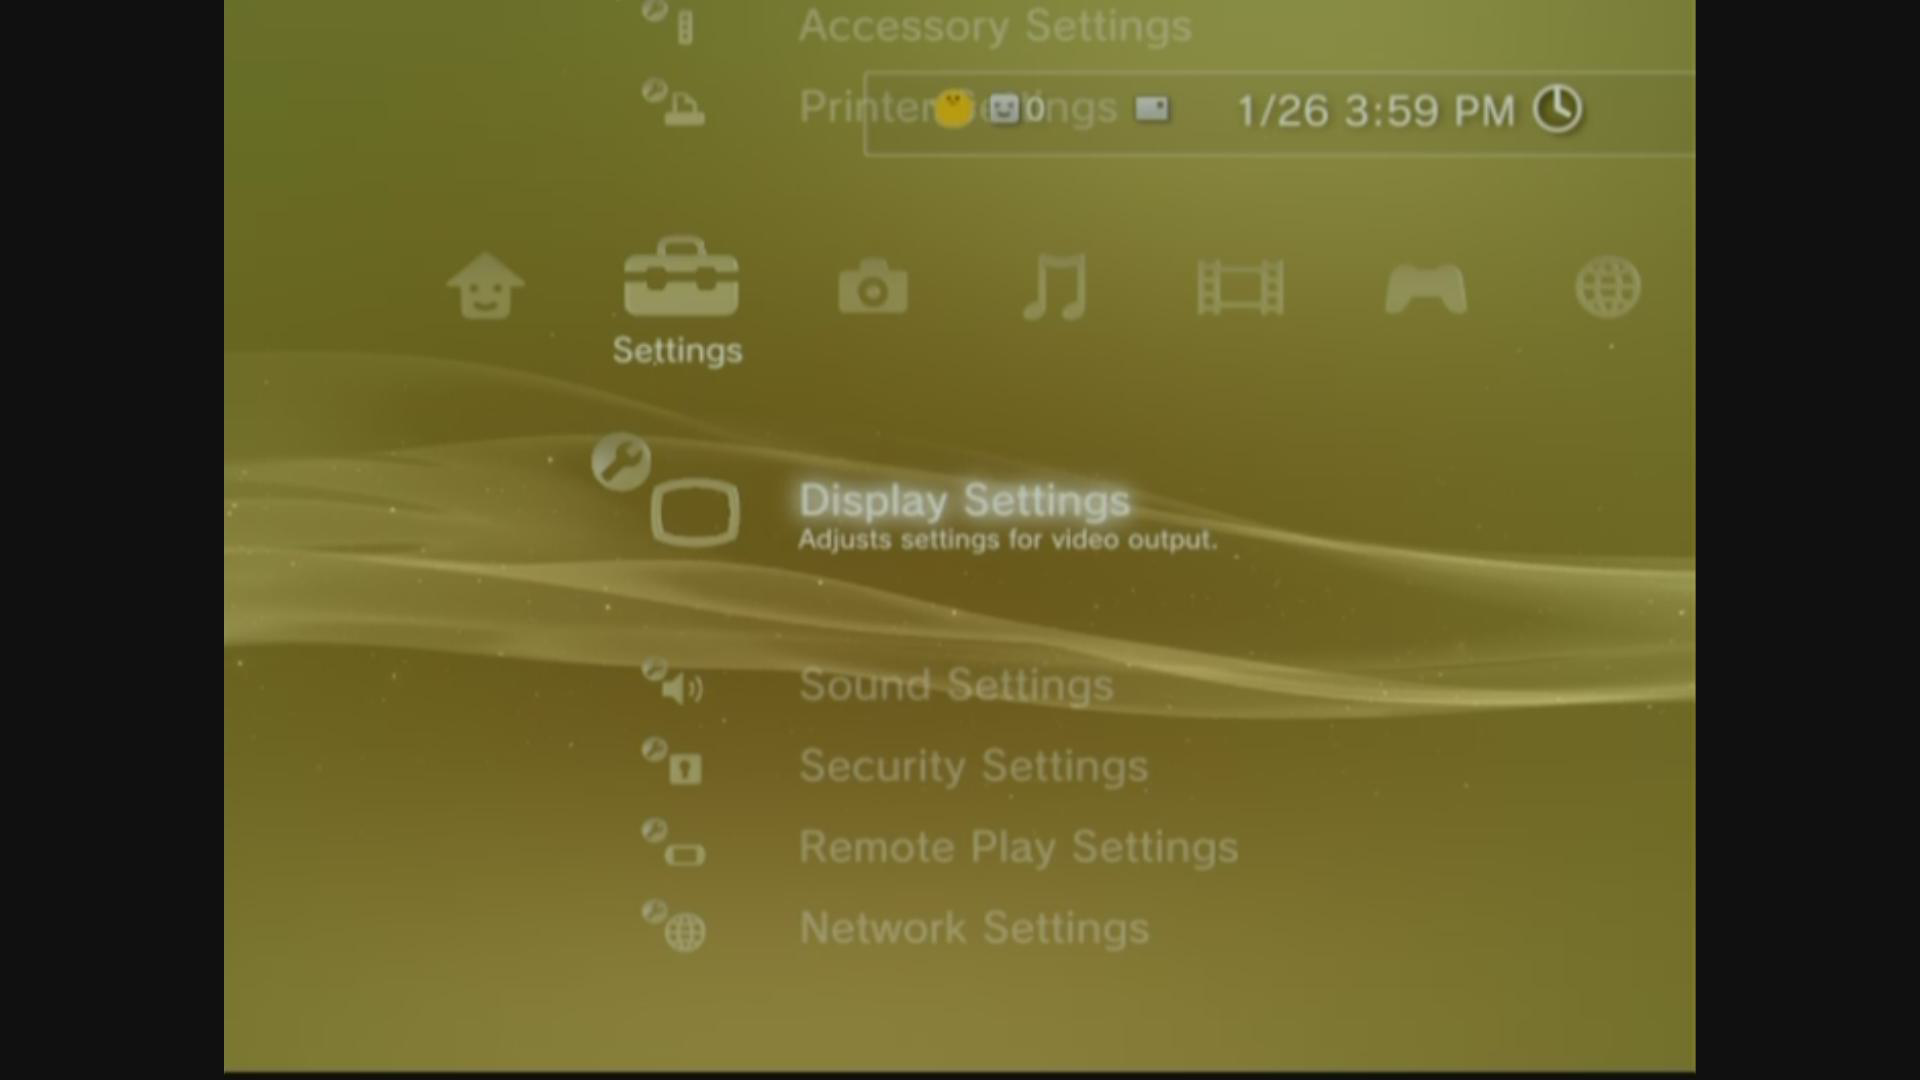 ps3 video output settings reset